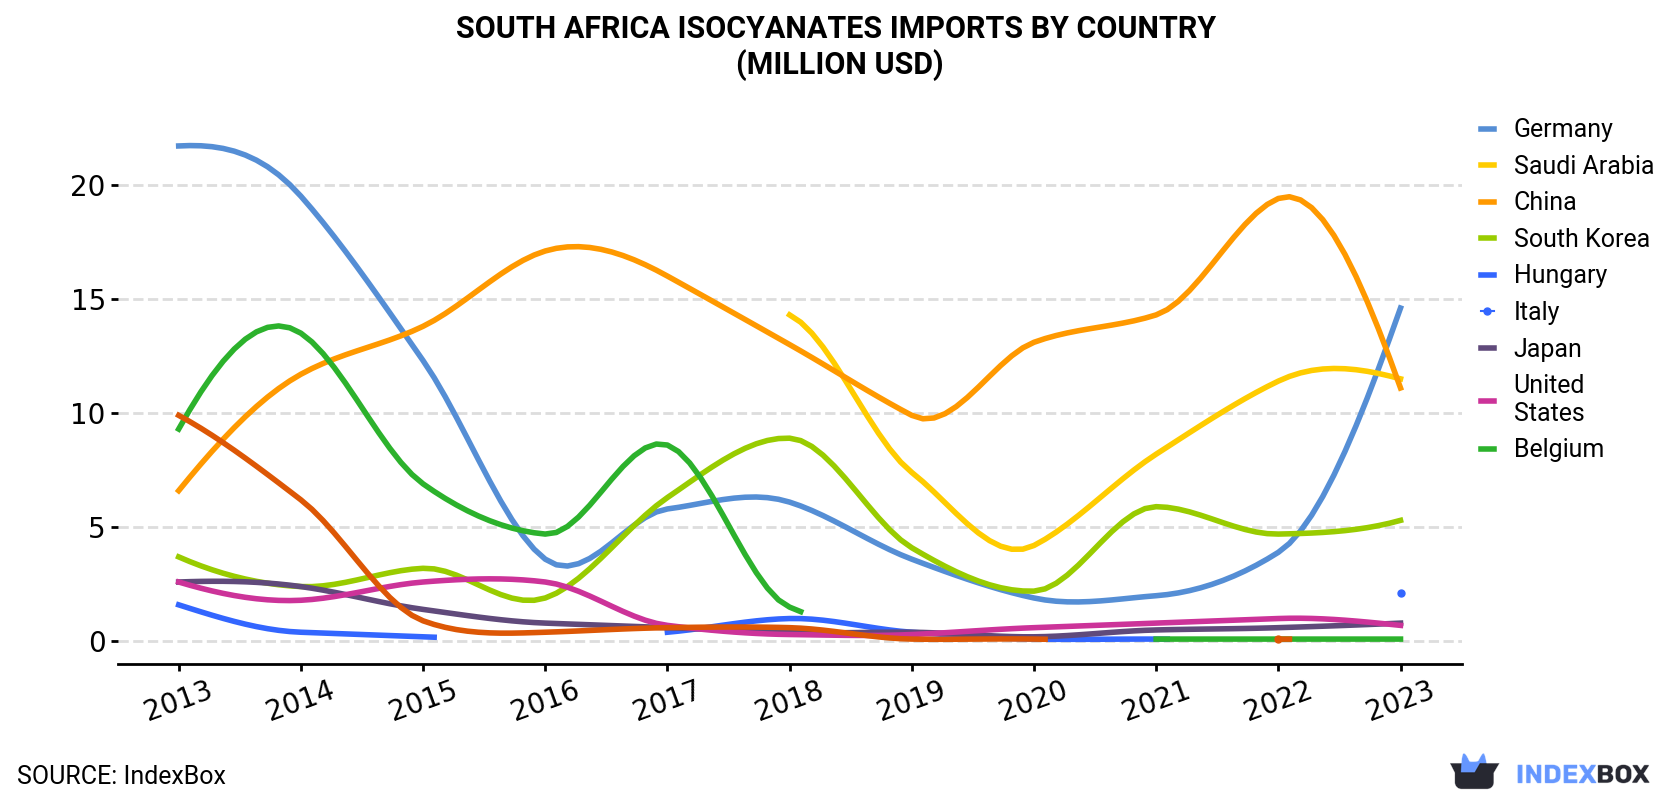 South Africa Isocyanates Imports By Country (Million USD)